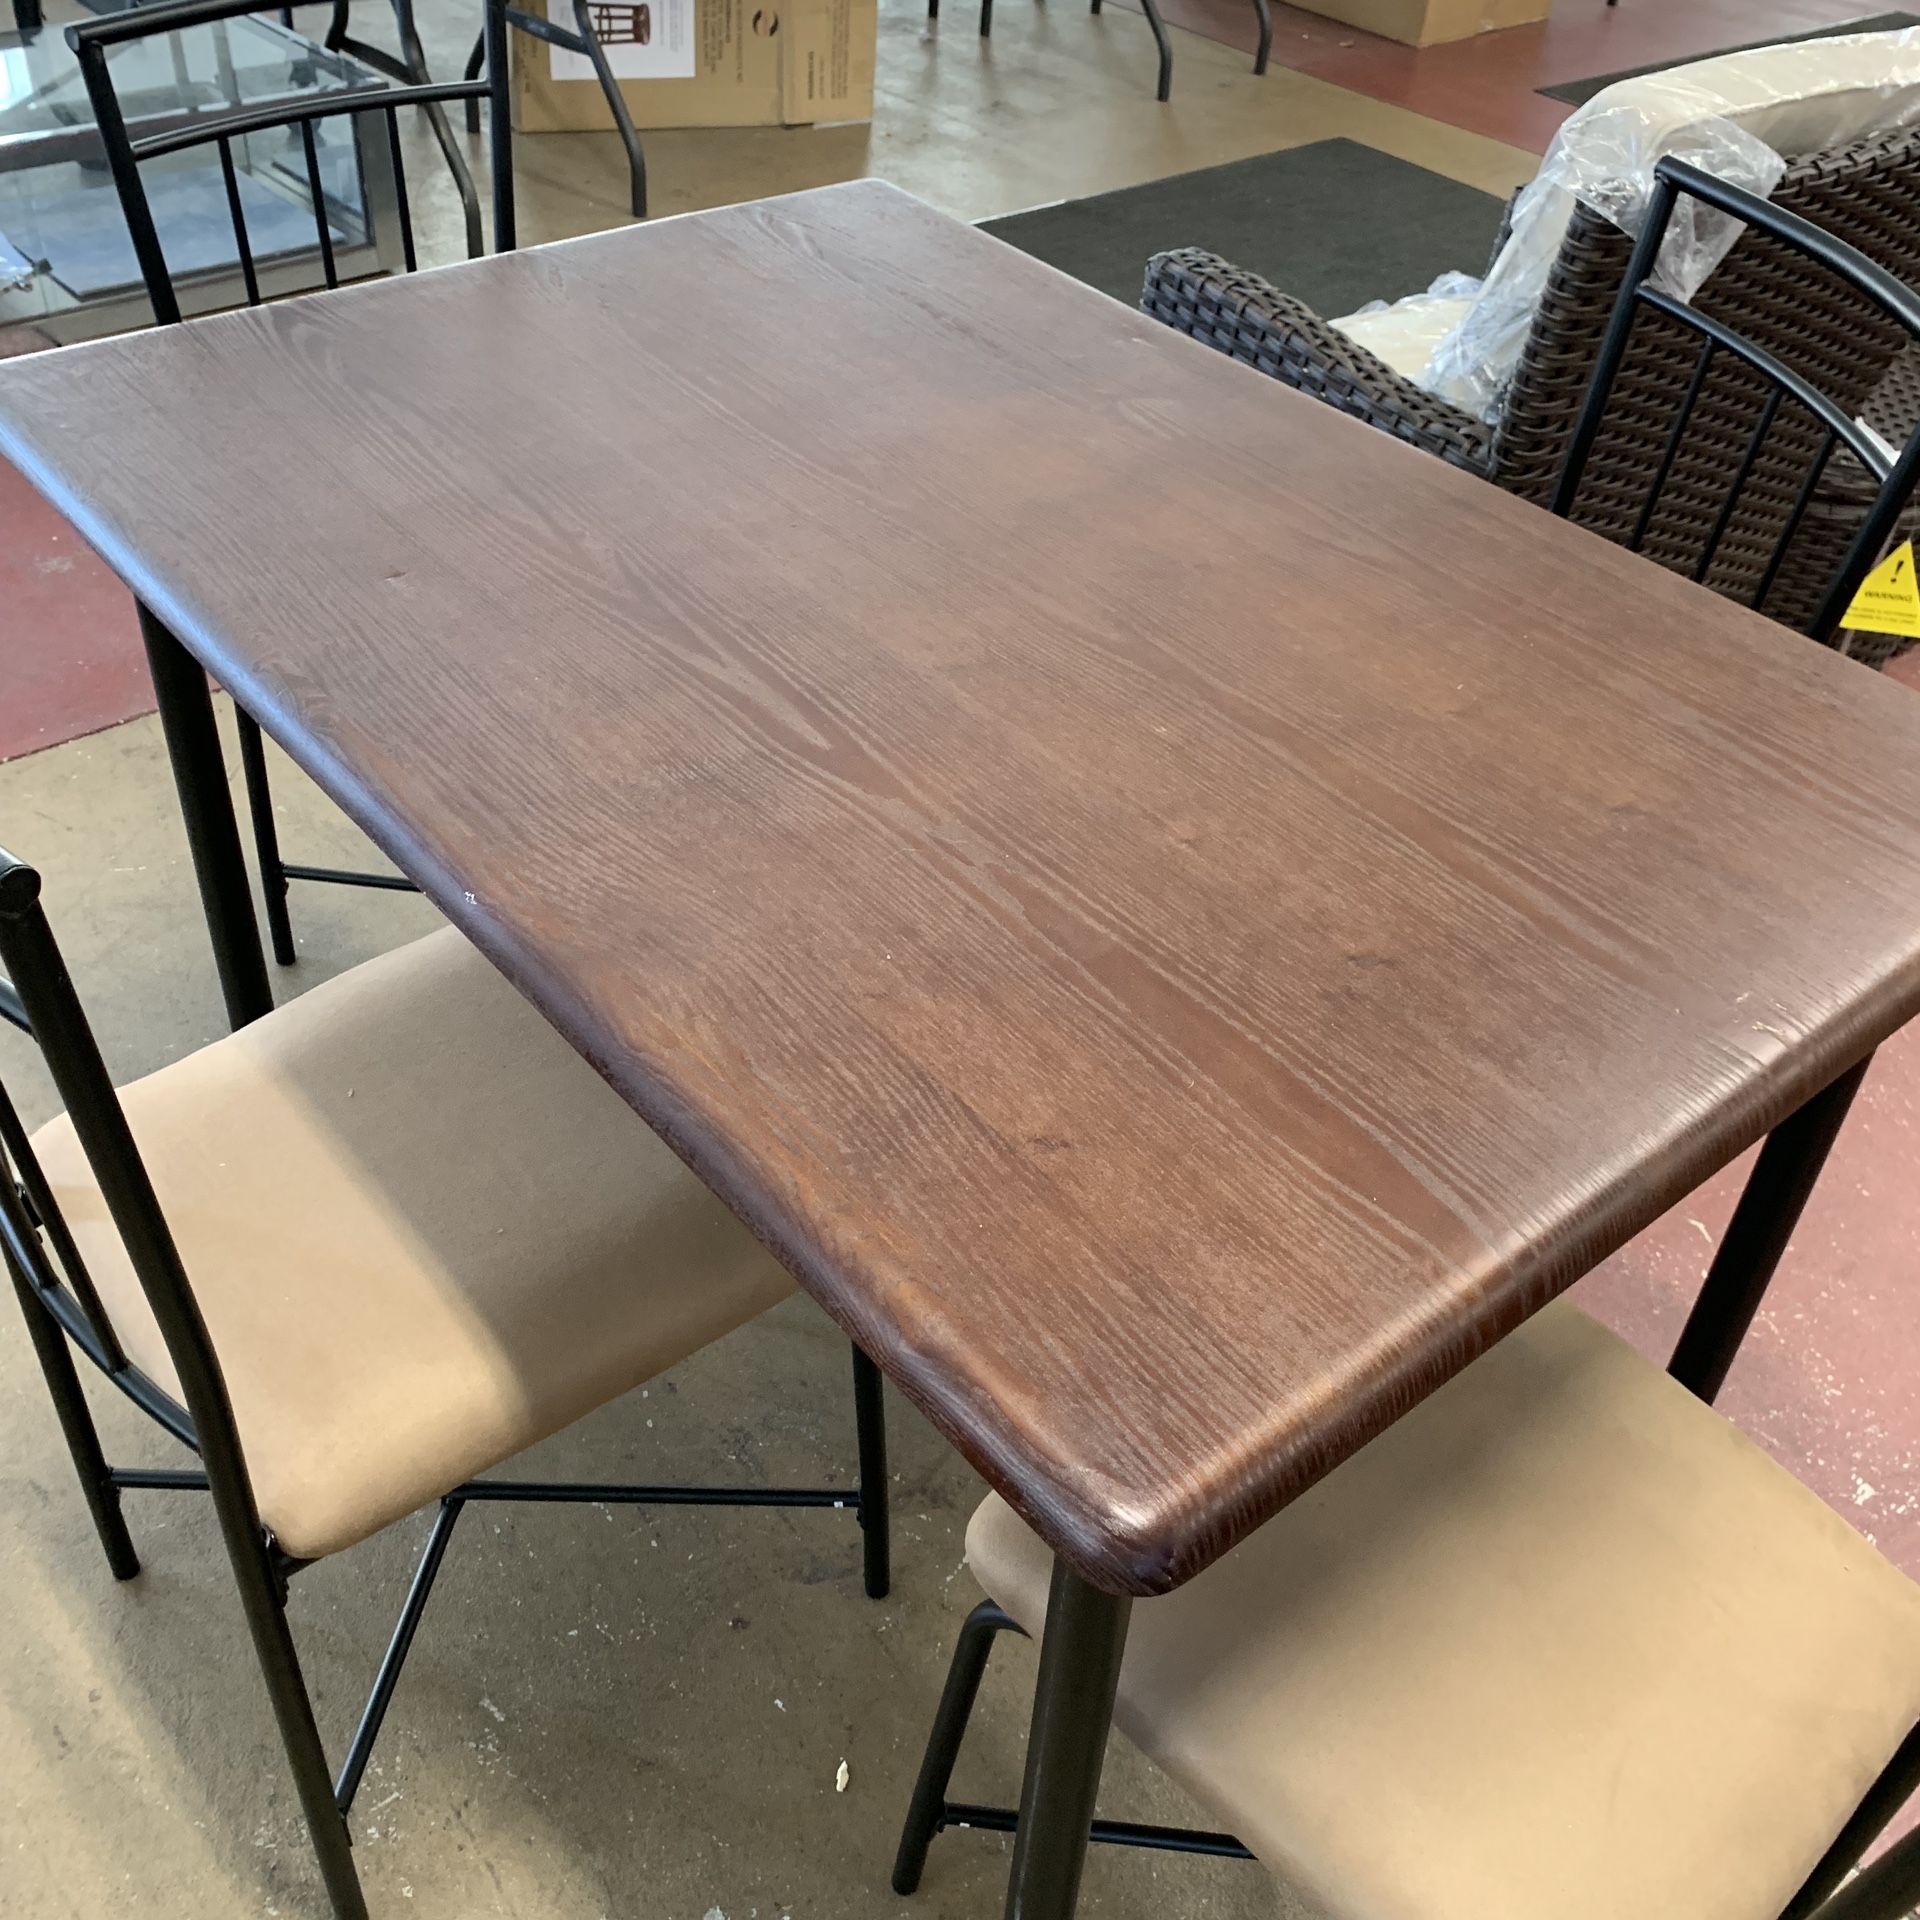 Kitchen table and chairs. Good condition.